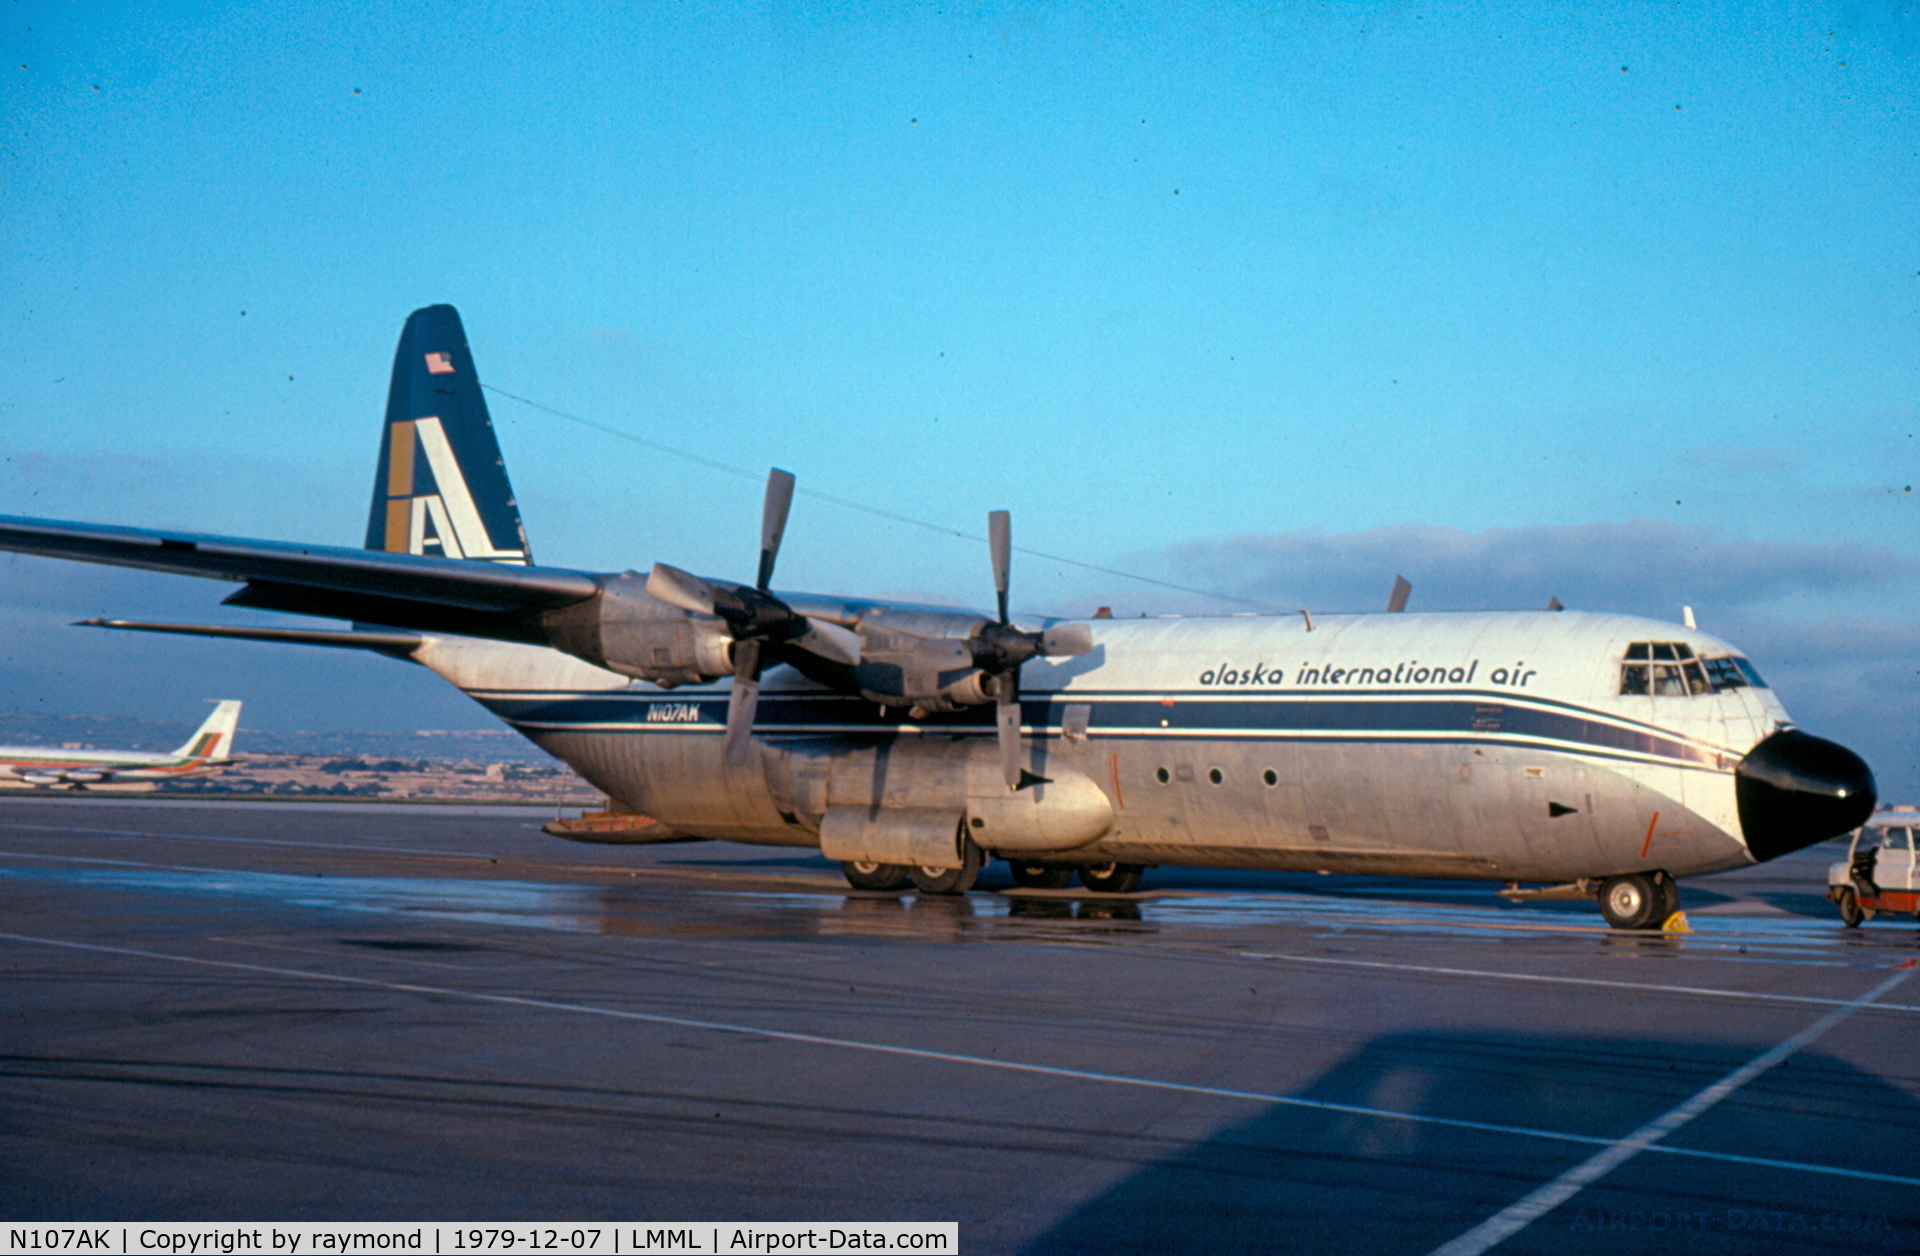 N107AK, 1972 Lockheed L-100-30 Hercules (L-382G) C/N 382-4472, A very rare site!!!! Alaska International C130 called for an overnight stop over. Really fantastic....